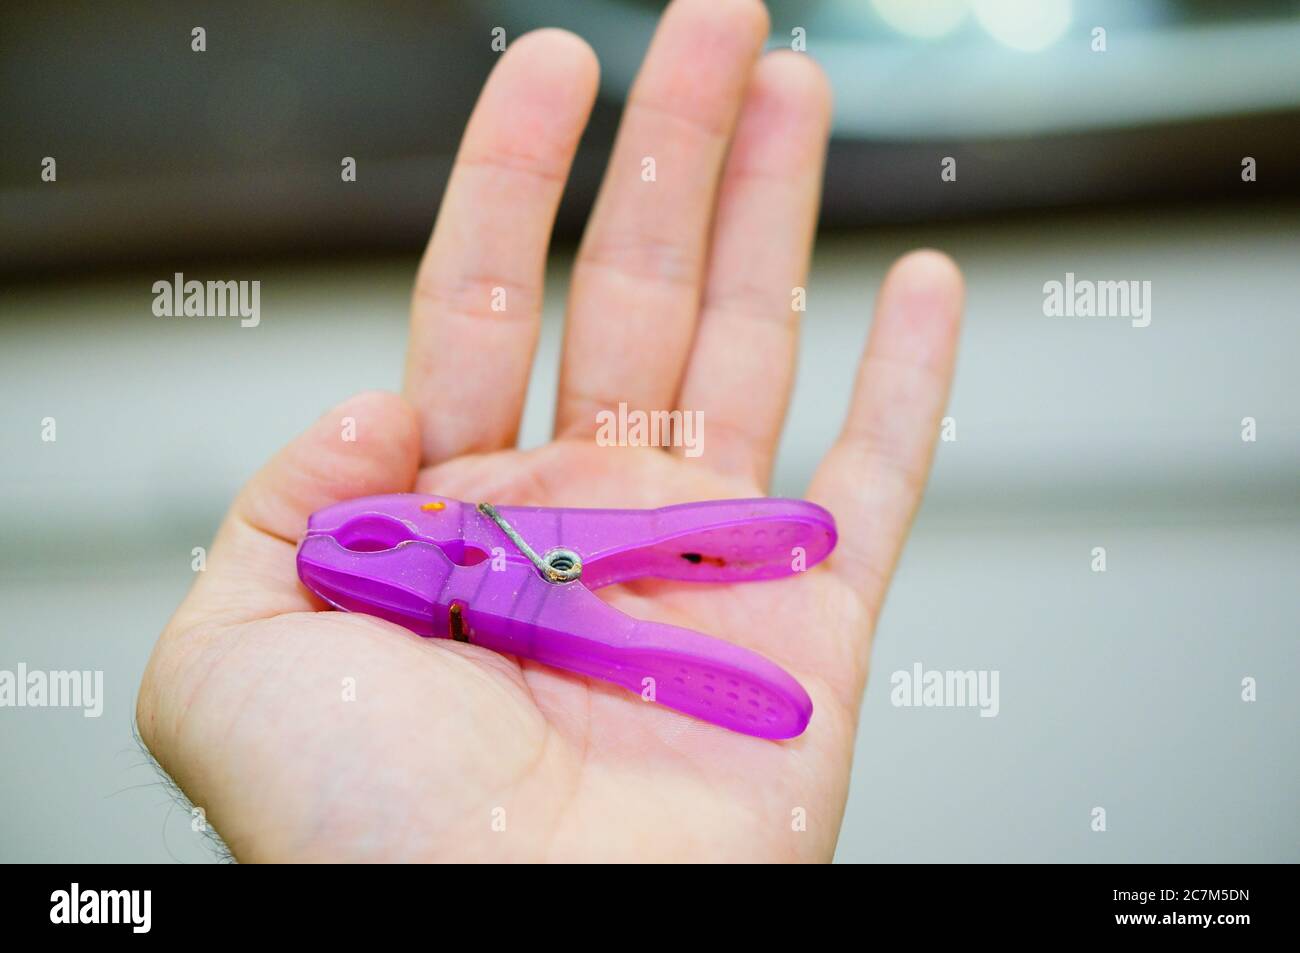 Purple clothespin put in a person's palm during daytime Stock Photo